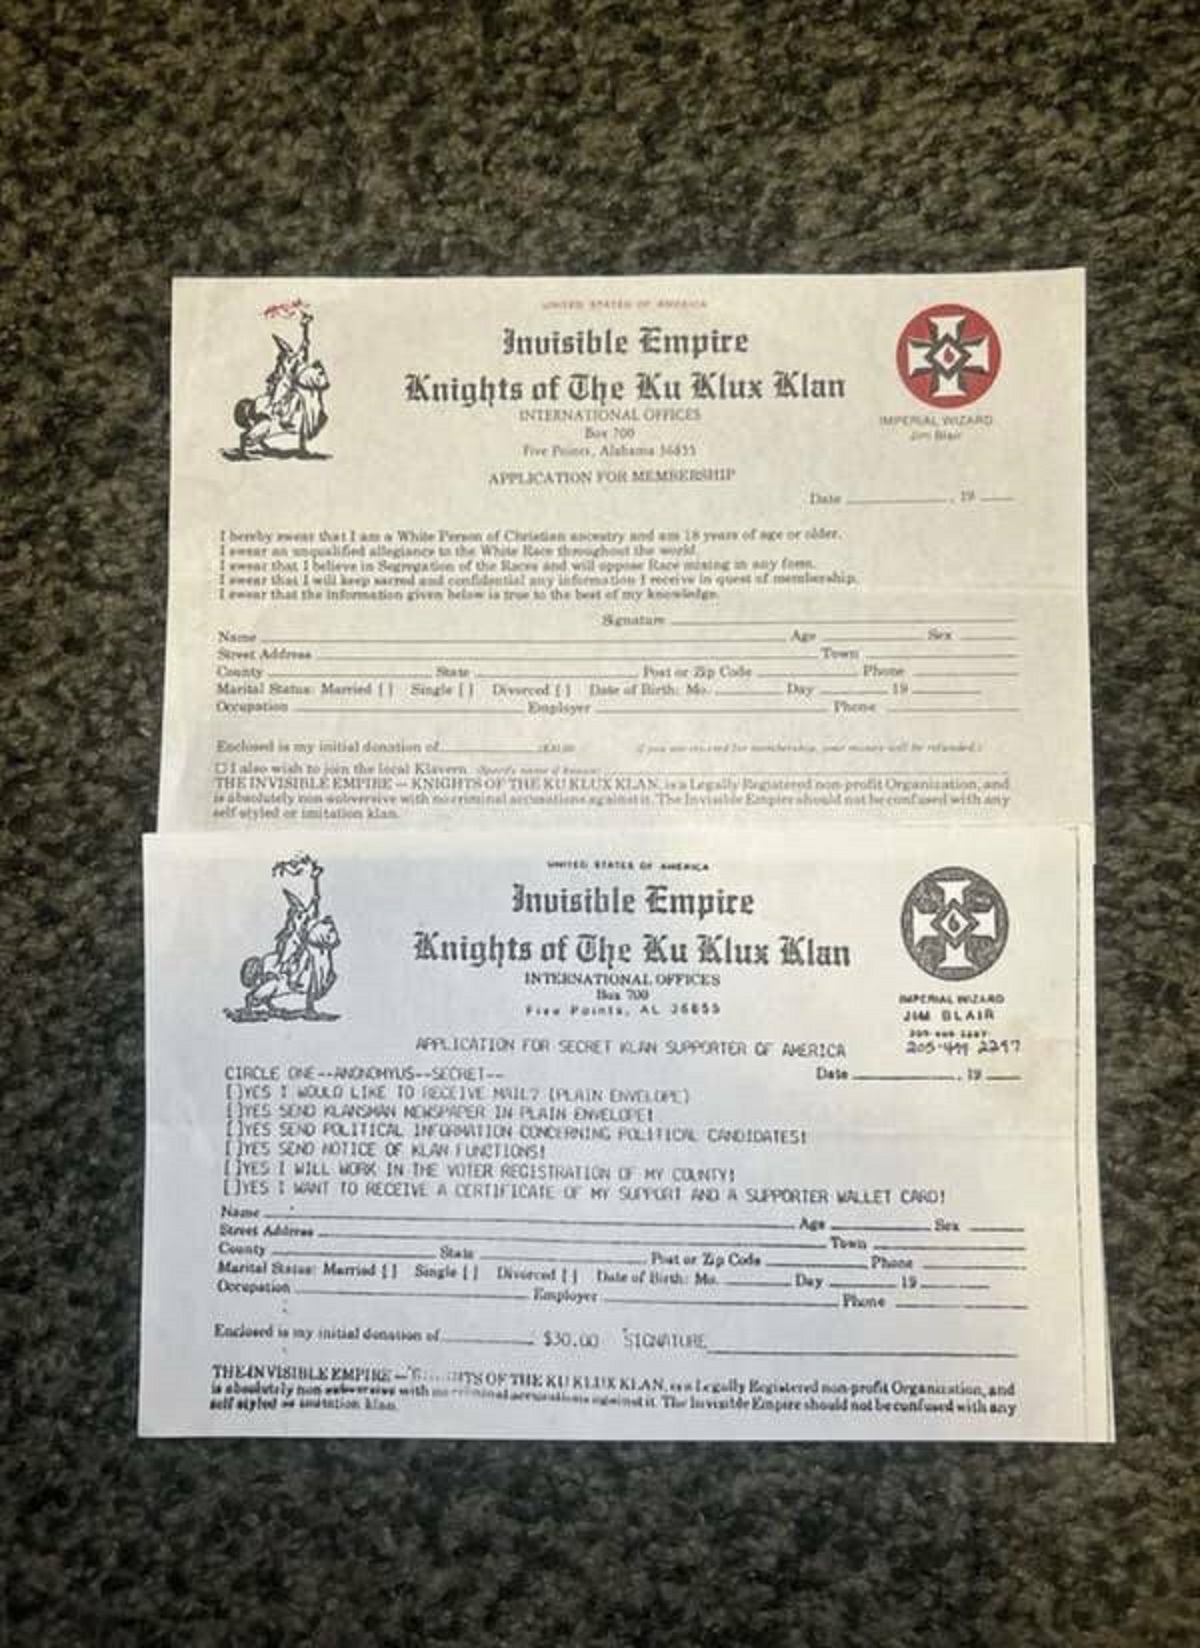 Here is an old KKK membership form.